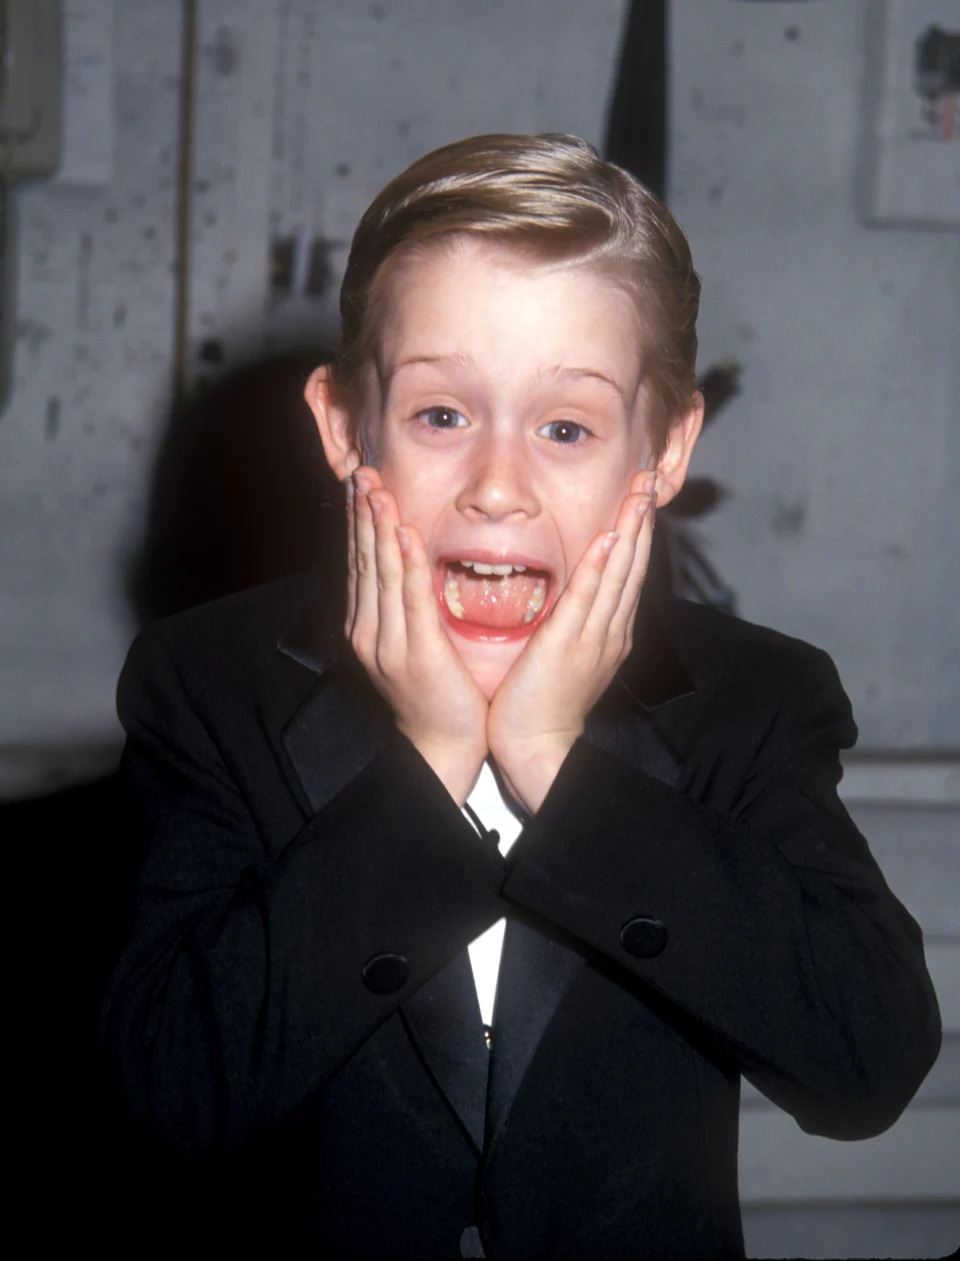 MacCaulay Culkin at the American Comedy Awards at the Shrine Auditoirum in Los Angeles, California in 1991. in Los Angeles, California (Photo by Barry King/WireImage)